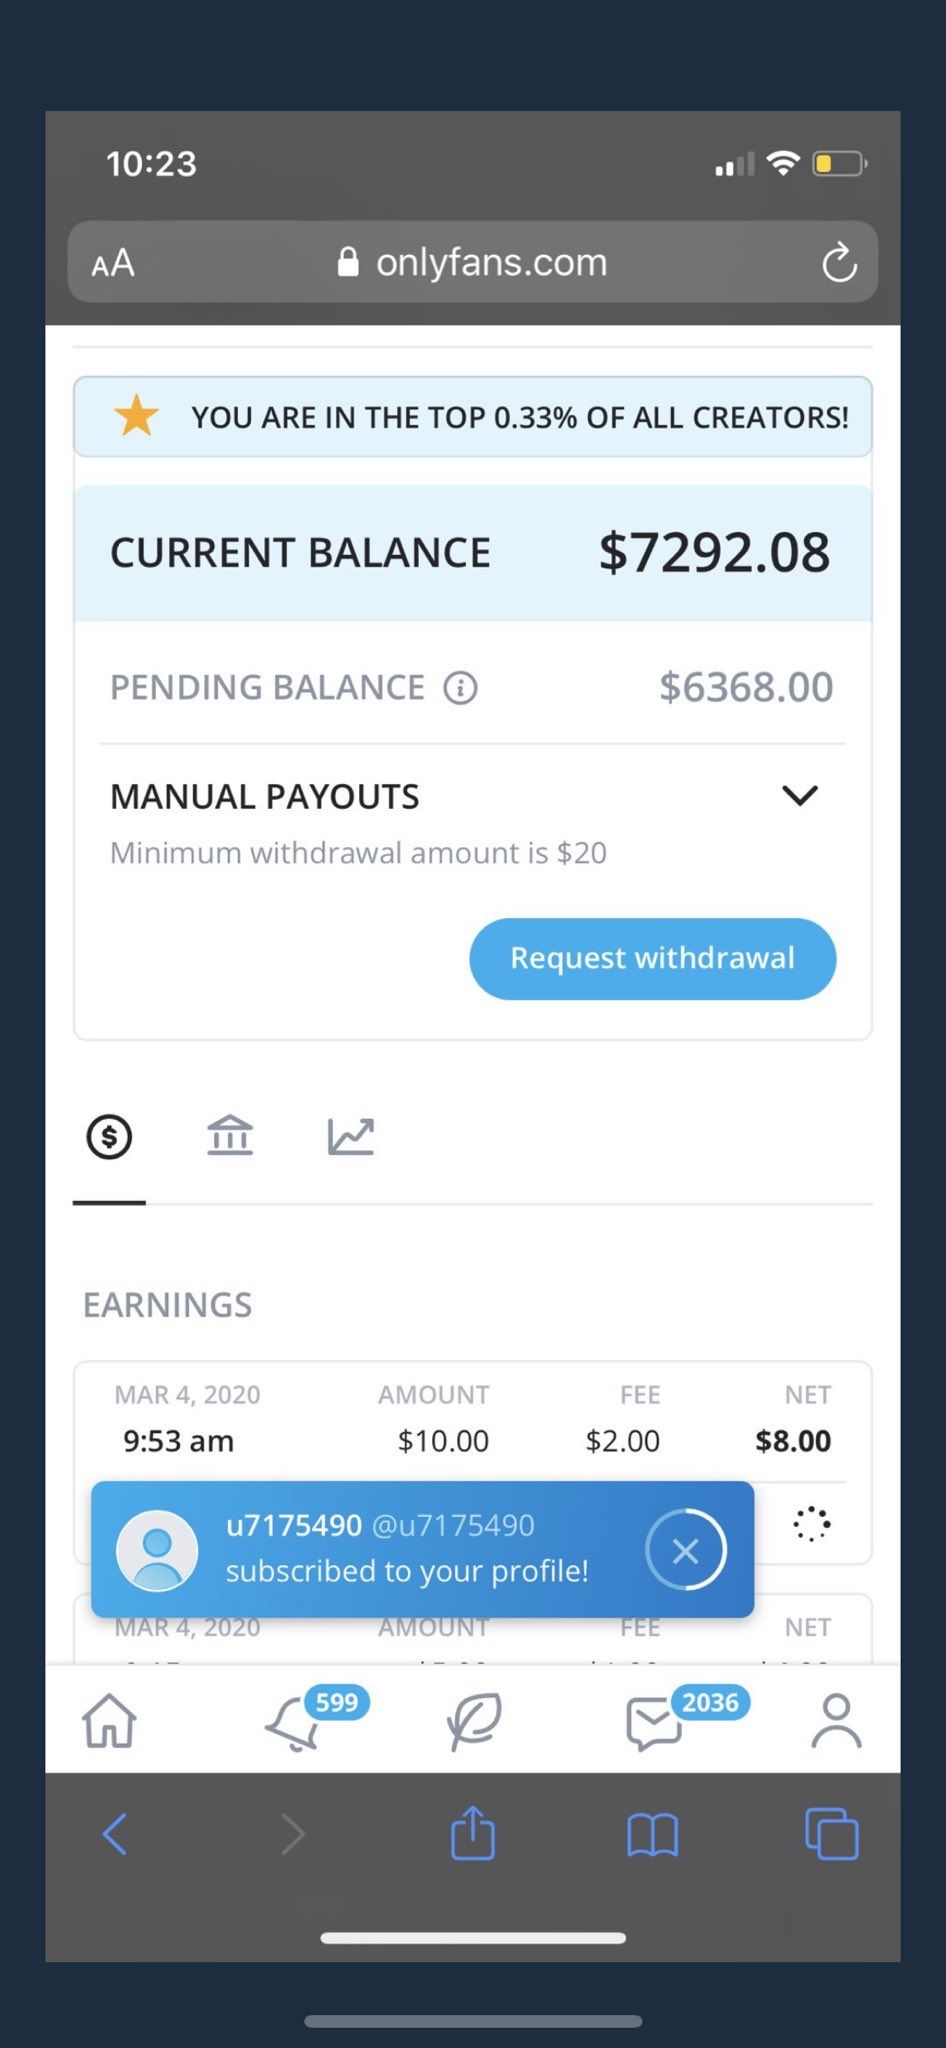 How Does Onlyfans Payout Work?